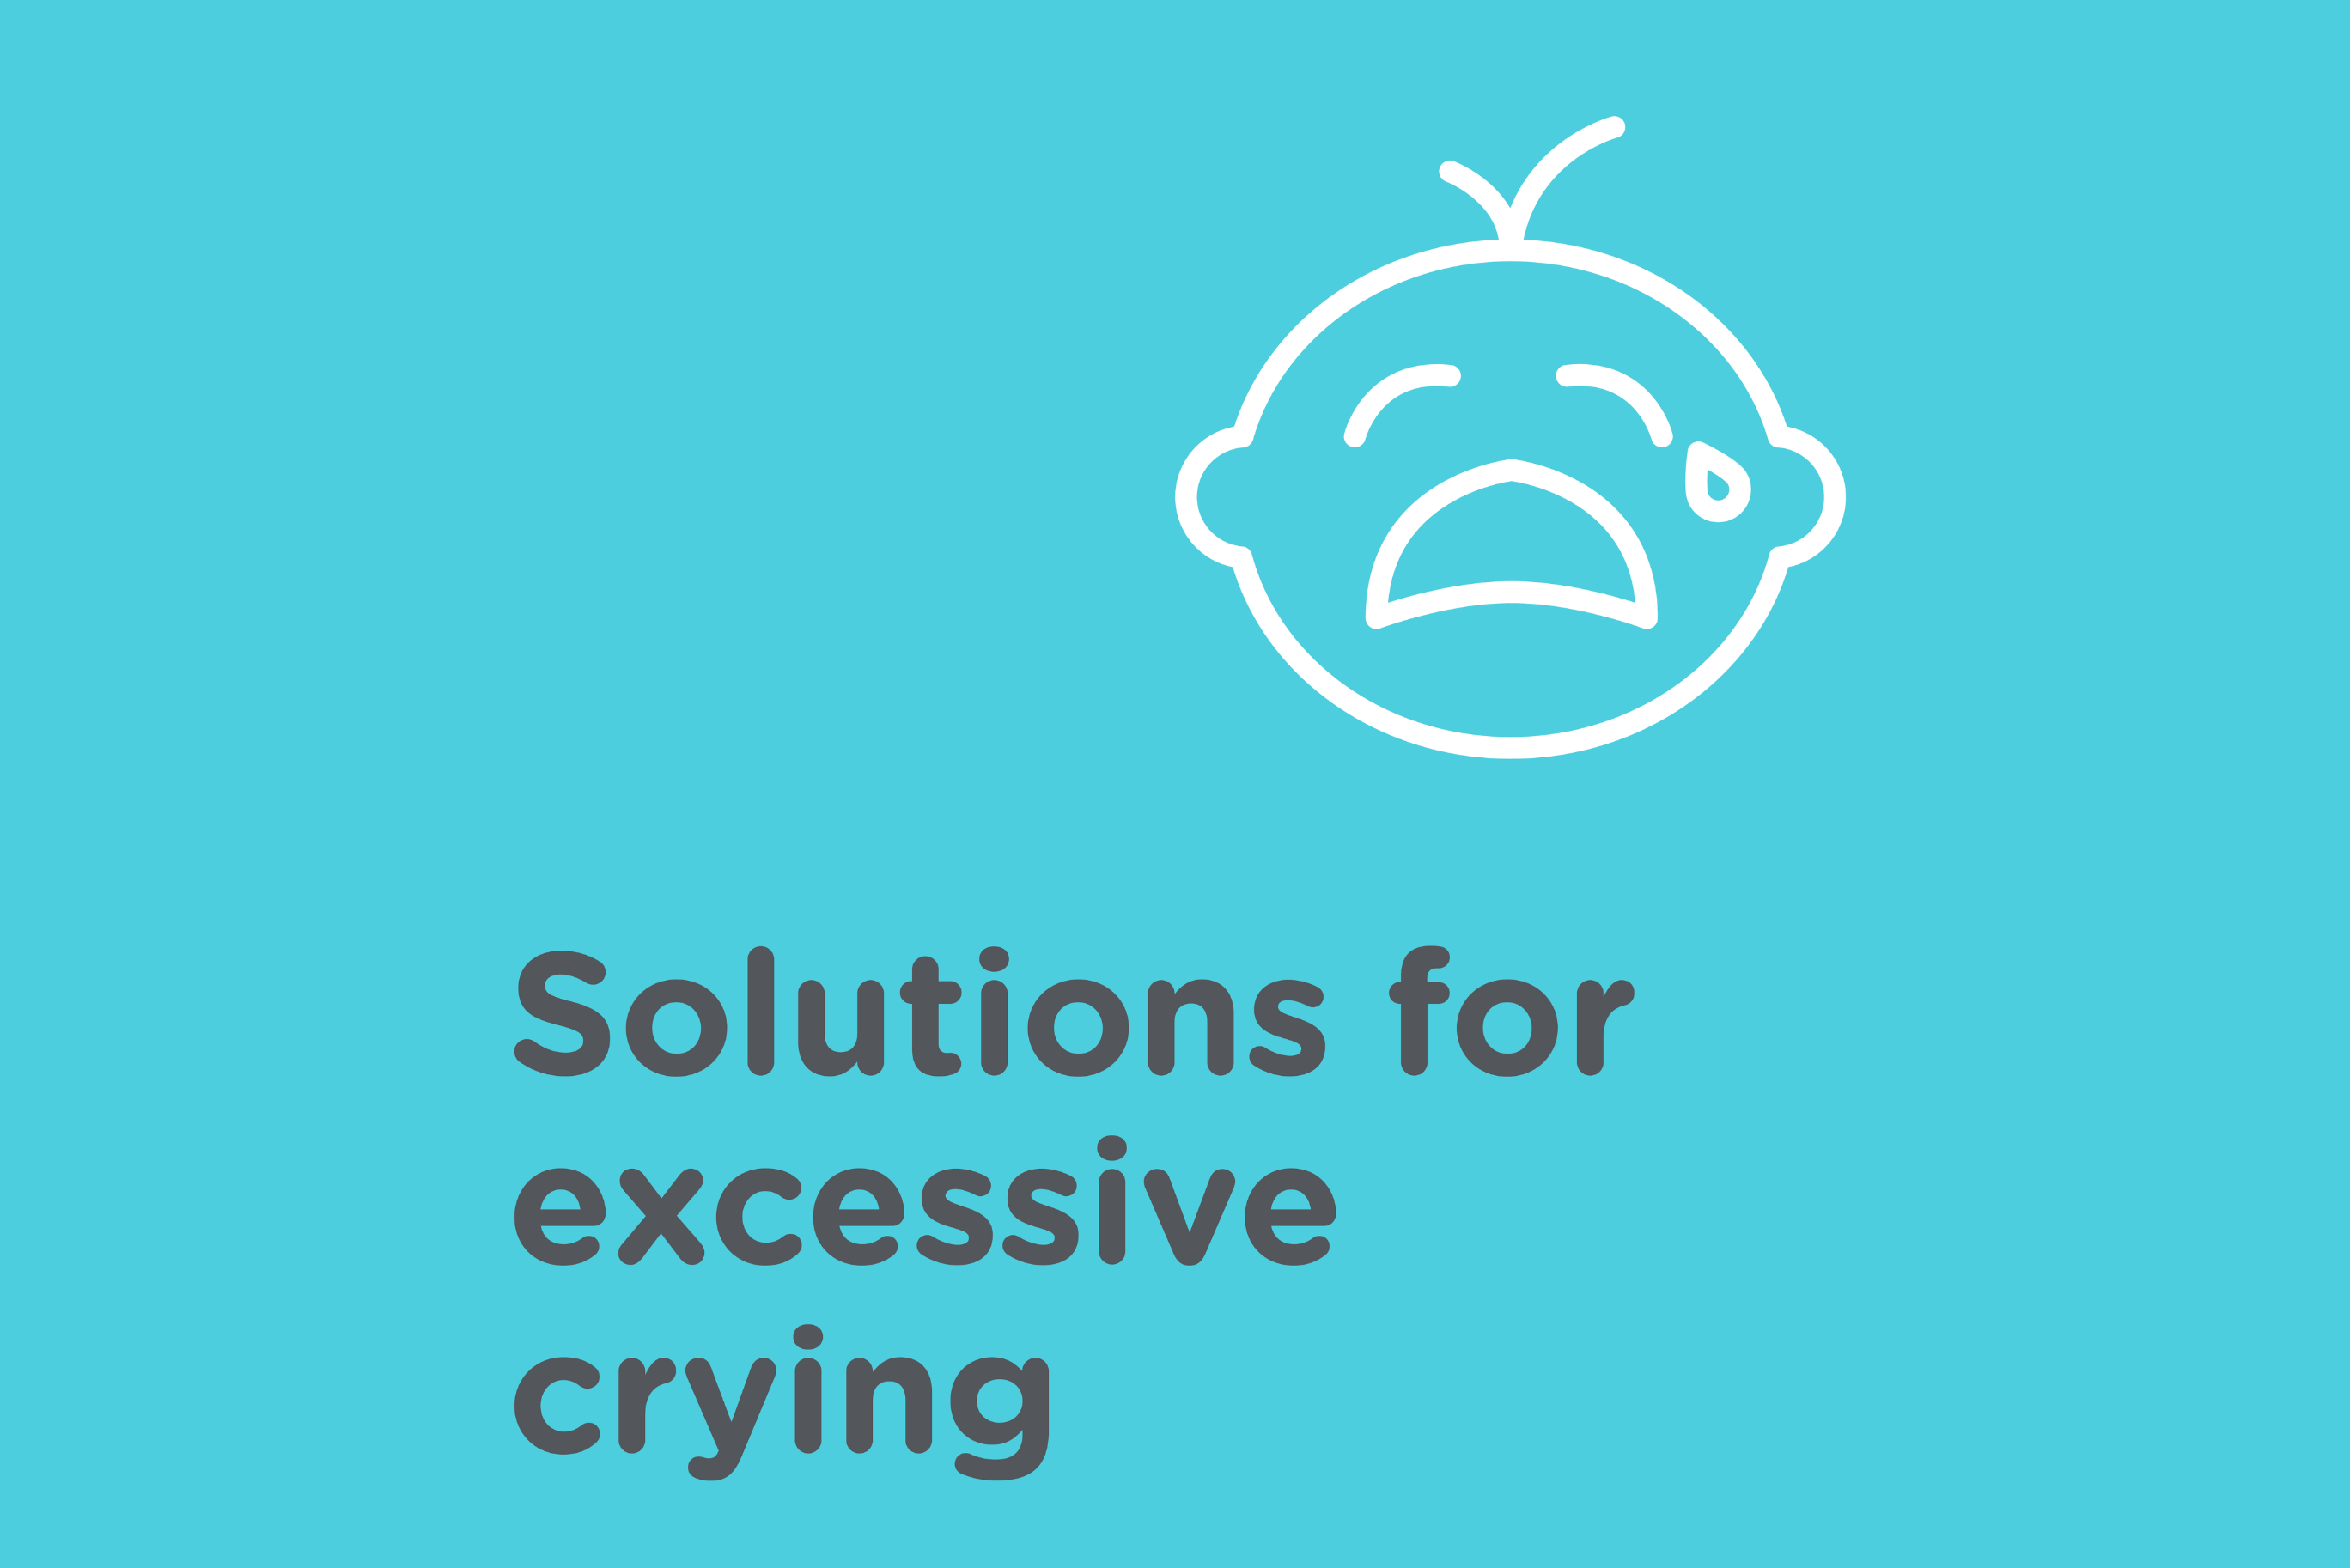 Solutions for excessive crying with a crying baby icon